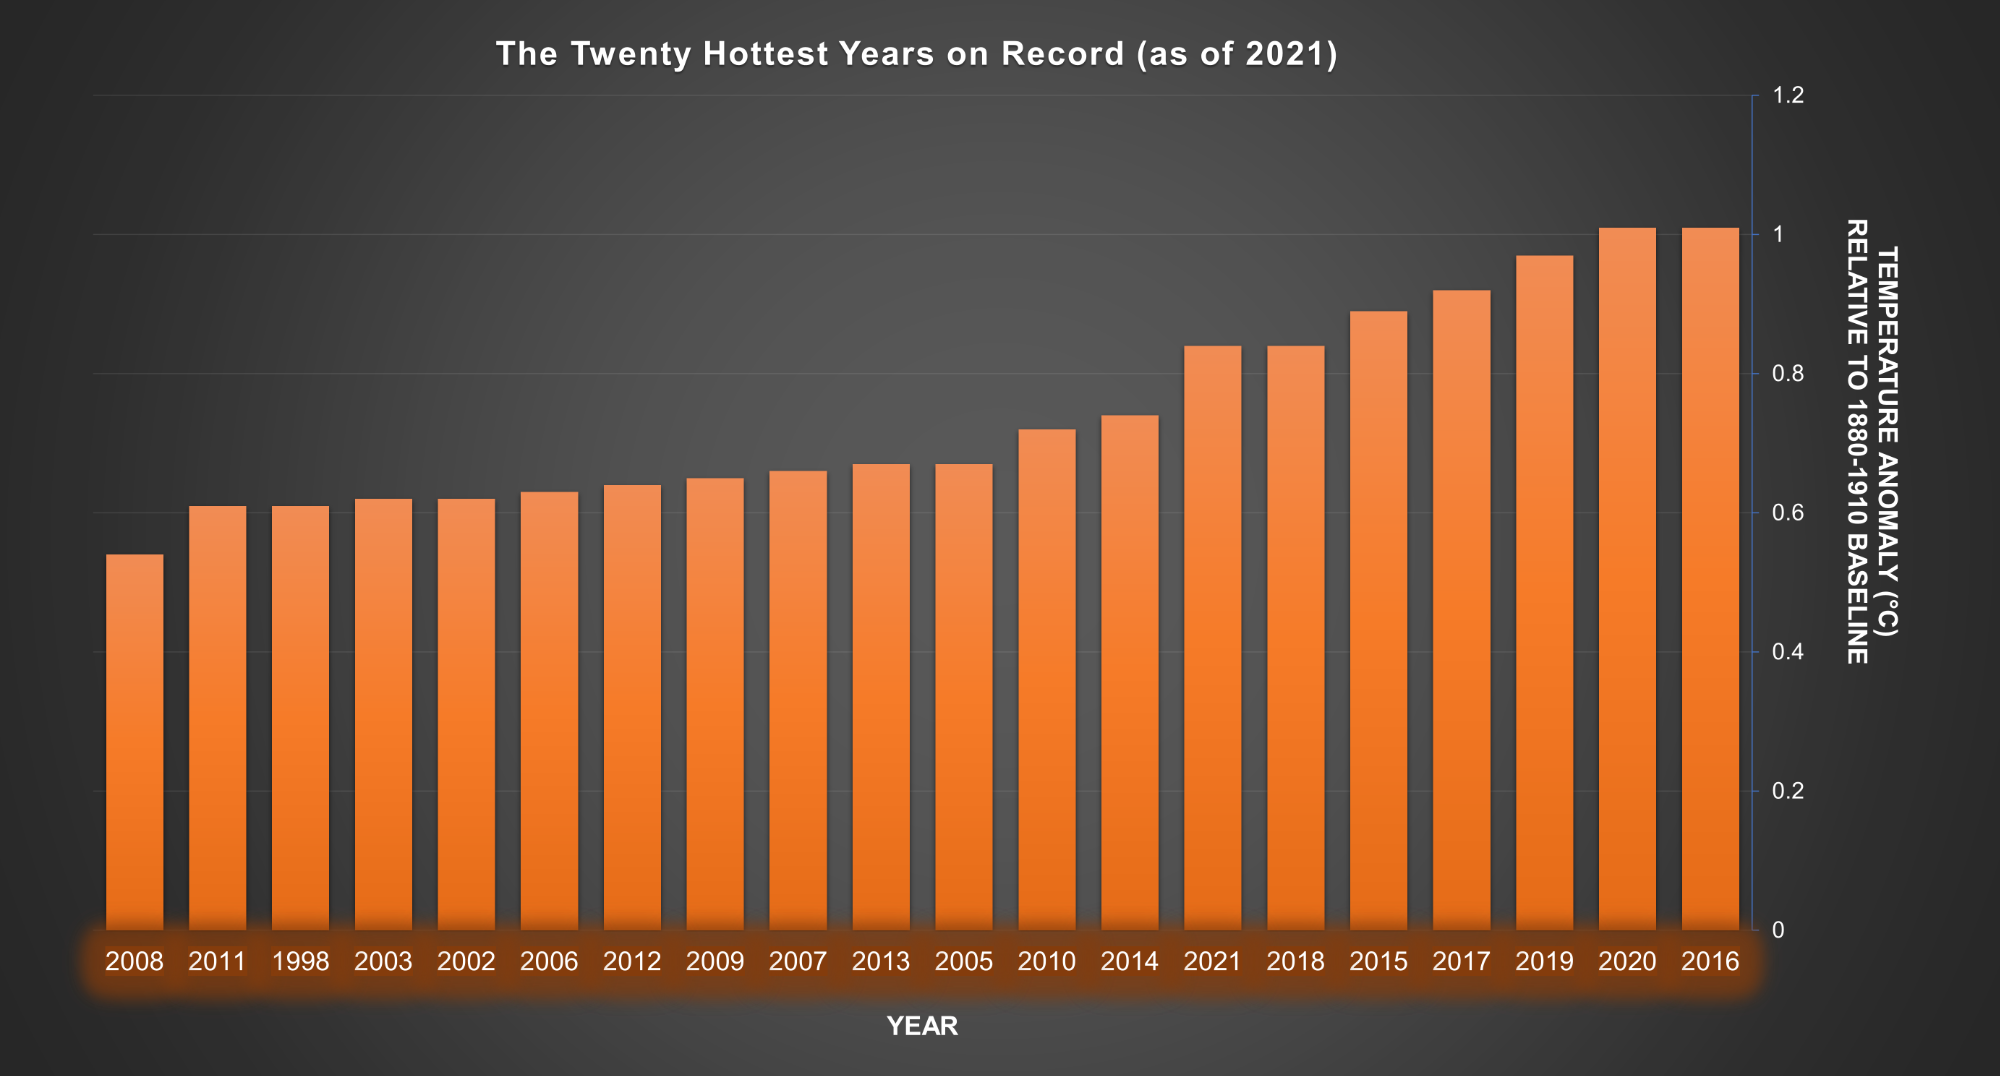 Chart showing the temperature anomalies of the 20 hottest years on record.